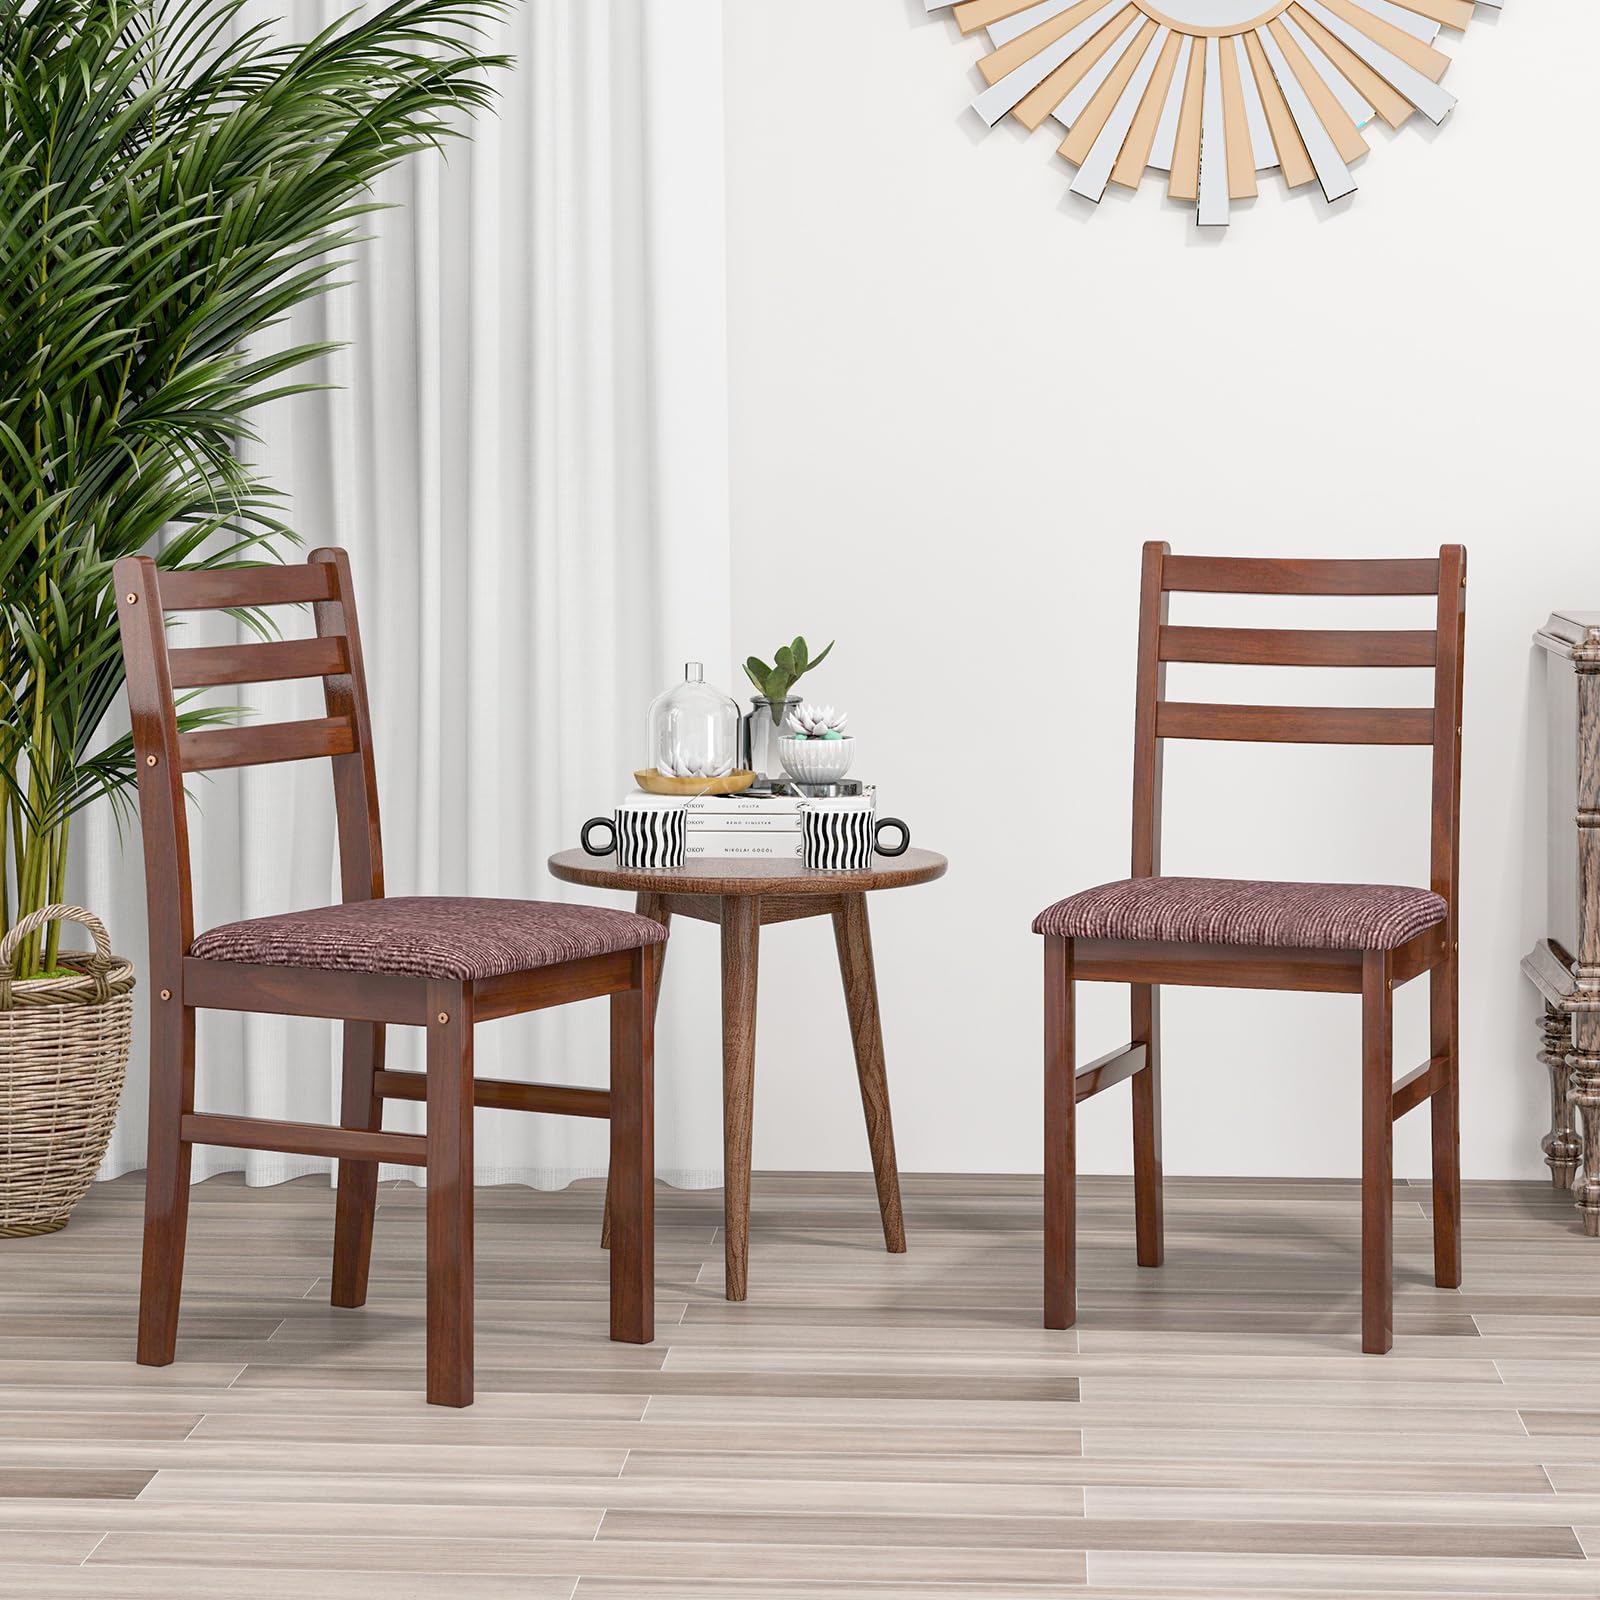 Giantex Wooden Dining Chairs Walnut Set of 4, Mid-Century Dining Chair with Padded Seat